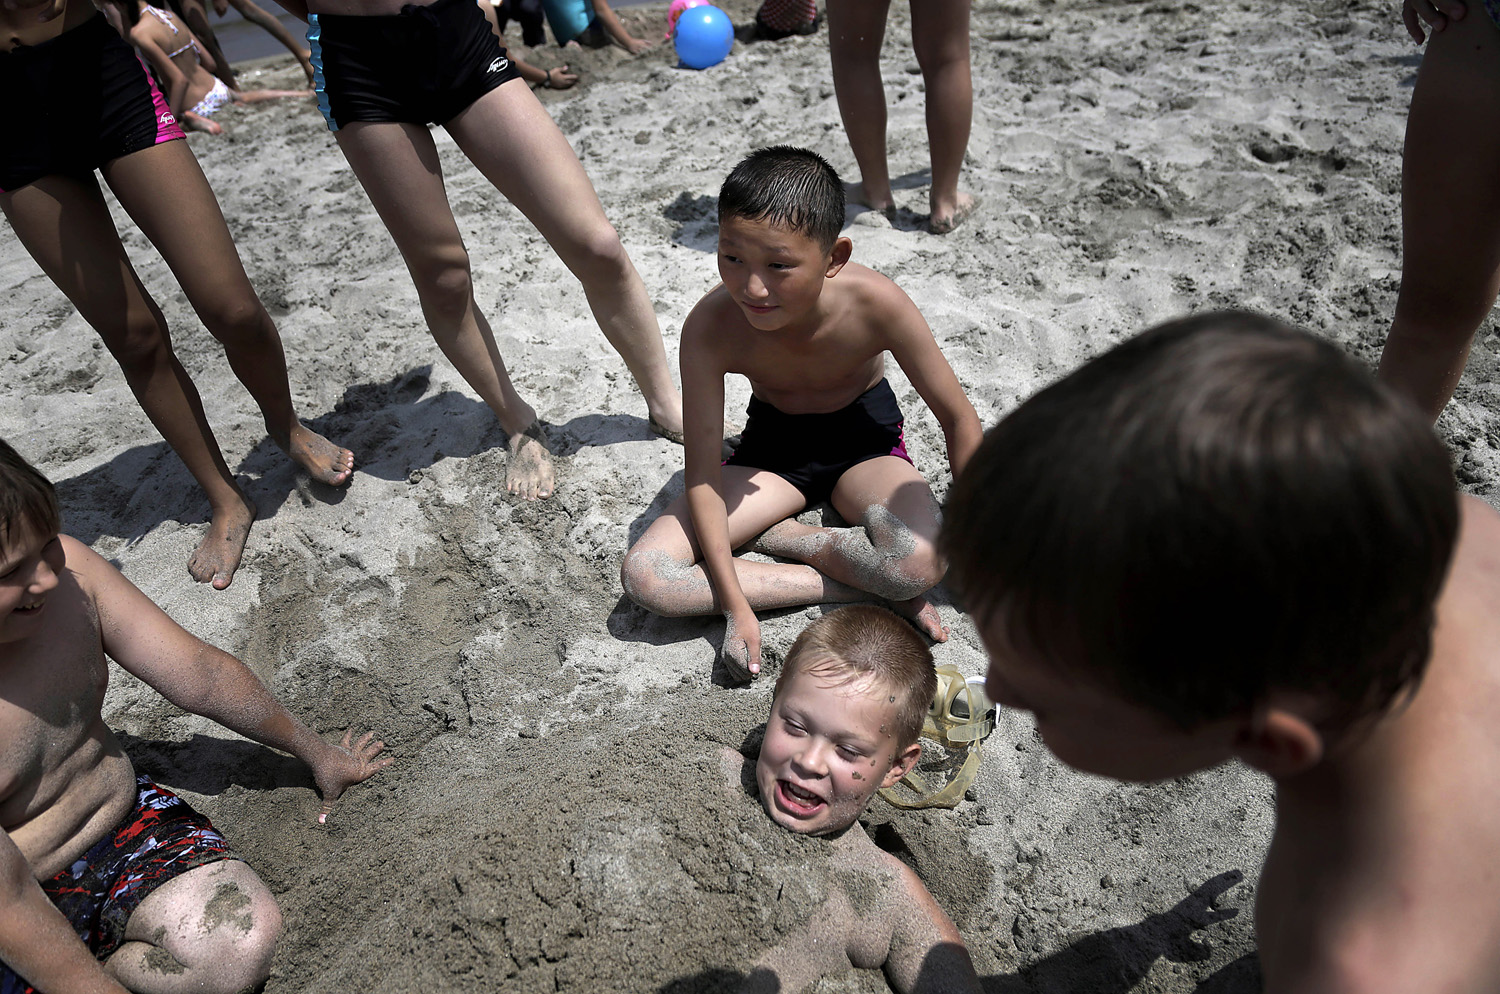 Kim Sun Gun, 12, of North Korea, center, smiles as he watches other students bury Russian student Konstantin Kostya, 10, in the sand at the Songdowon International Children's Camp, Tuesday, July 29, 2014, in Wonsan, North Korea.